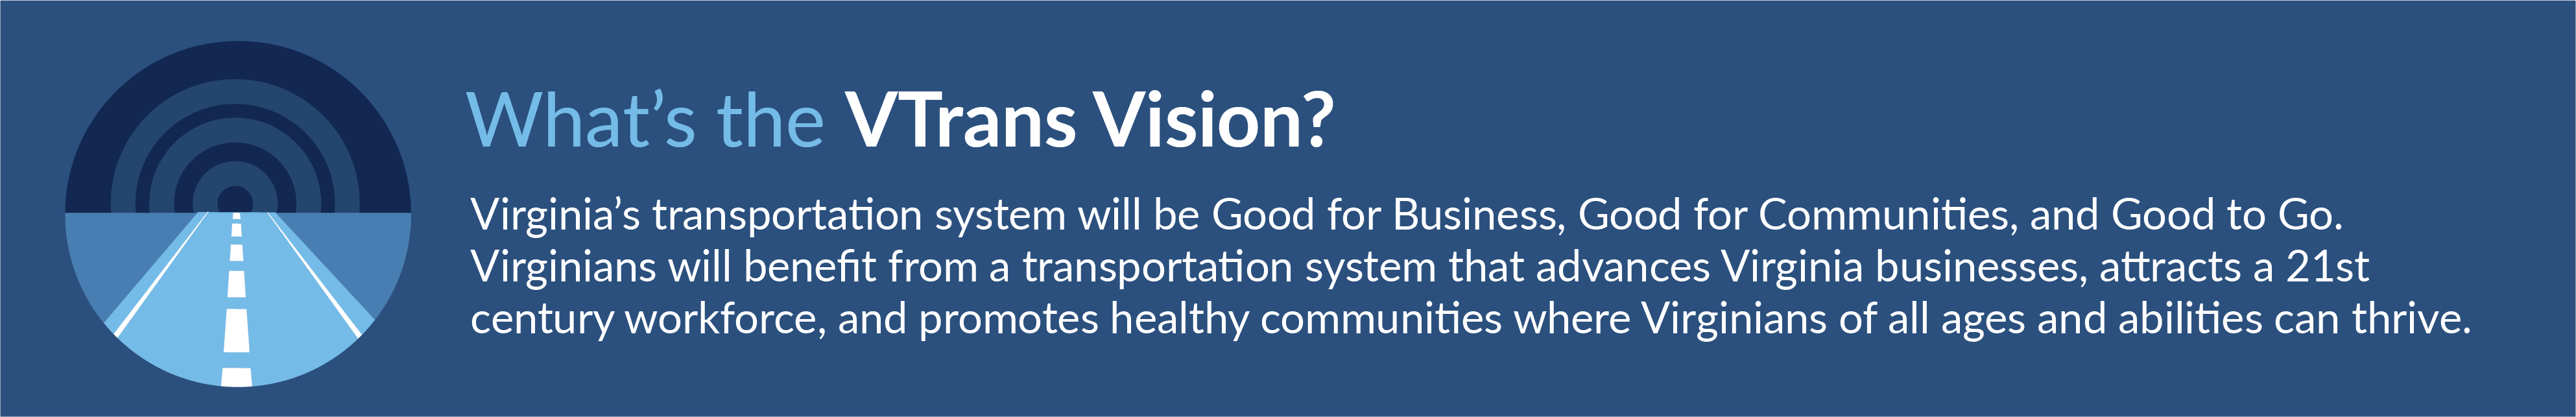 What's the VTrans Vision? Virginia's transportation system with be Good for Business, Good for Communities, and Good to Go. Virginians will benefit from a transportation system that advances Virginia businesses, attracts a 21st century workforce, and promotes healthy communities where Virginians of all ages and abilities can thrive.